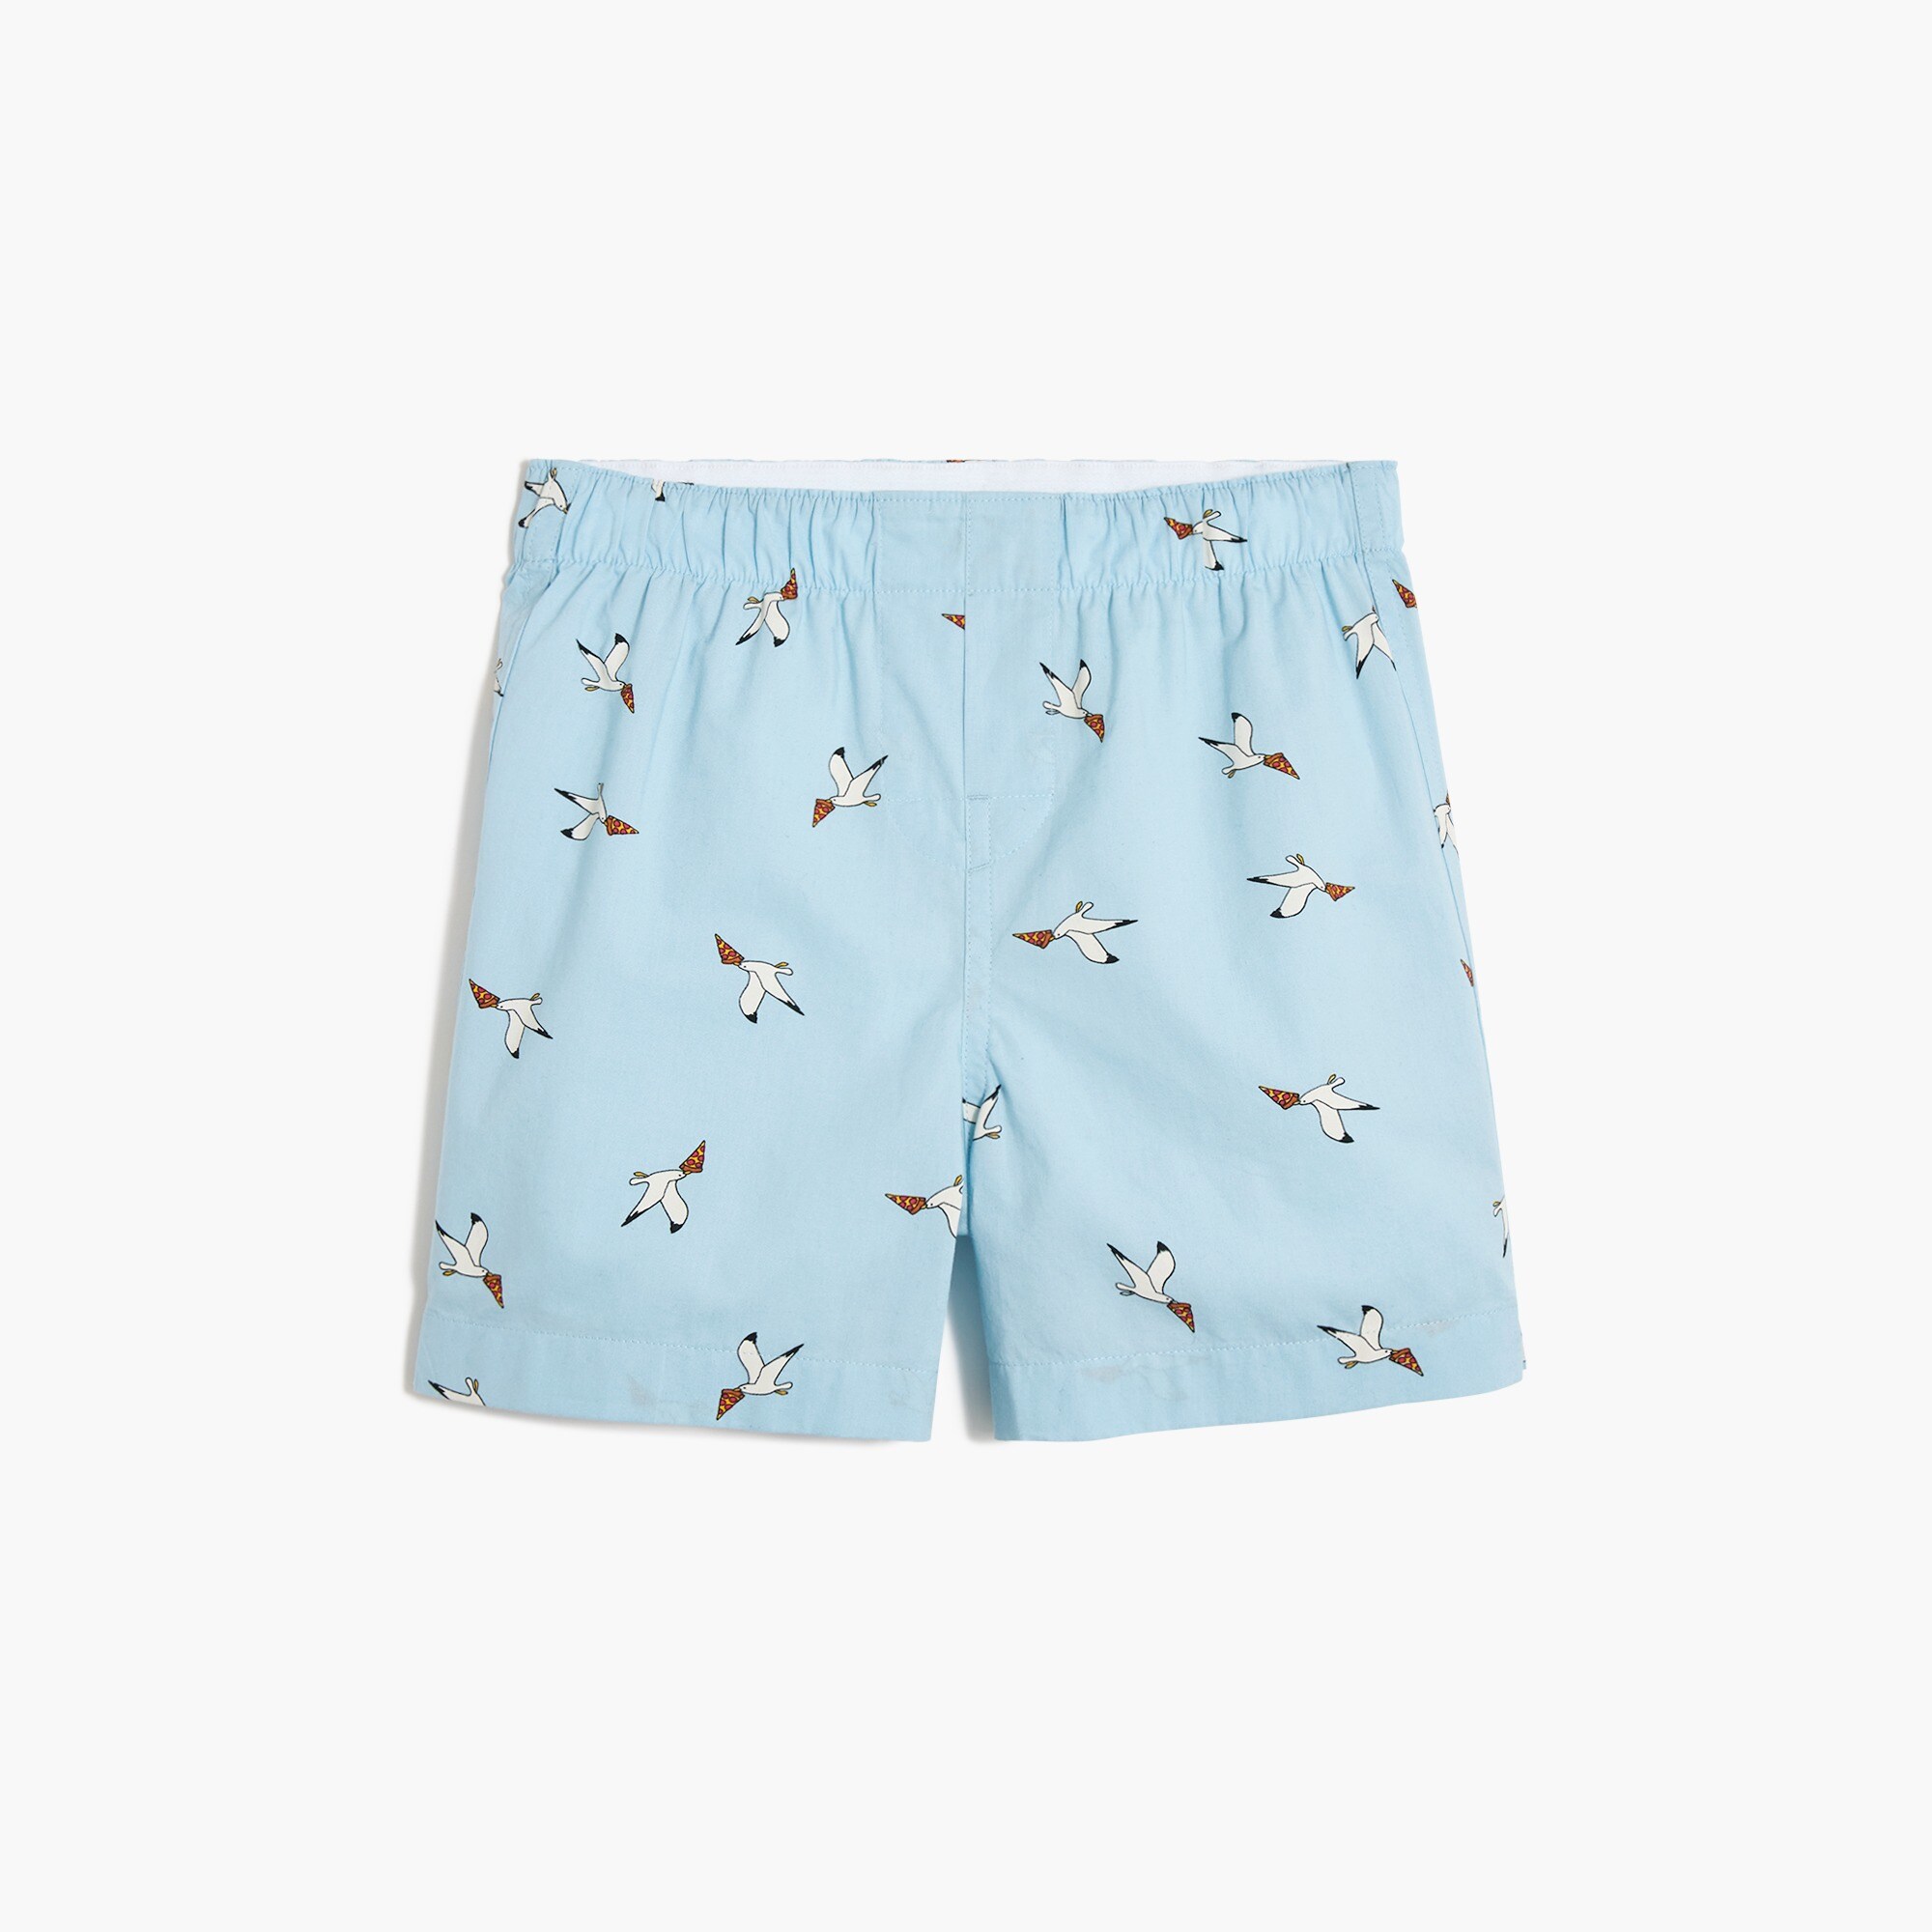  Boys' seagull with pizza boxers